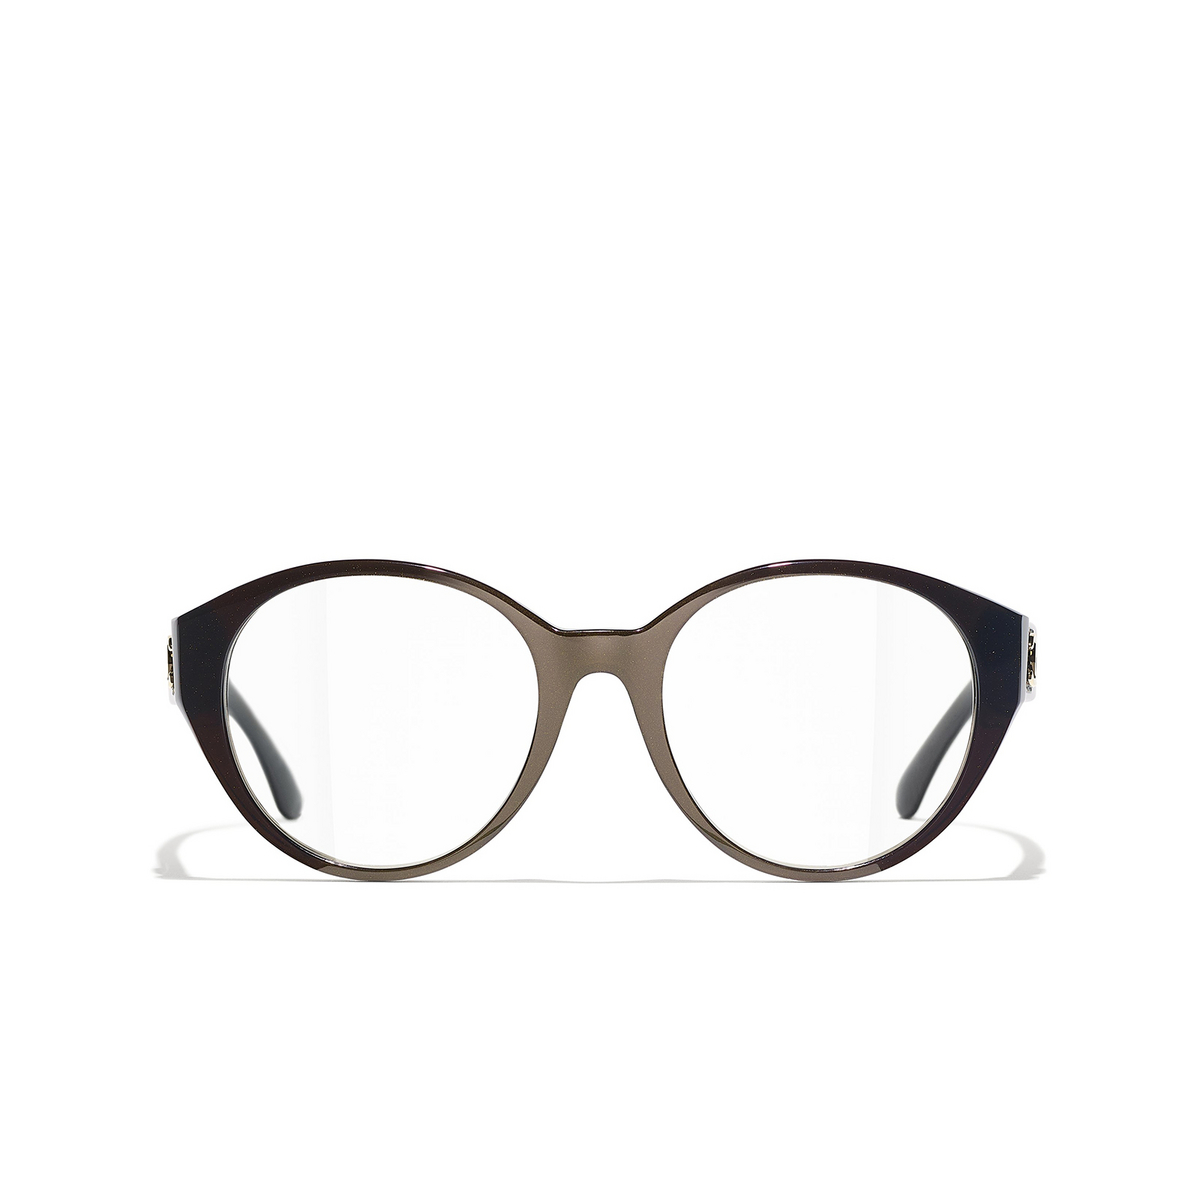 CHANEL round Eyeglasses 1706 Brown - front view